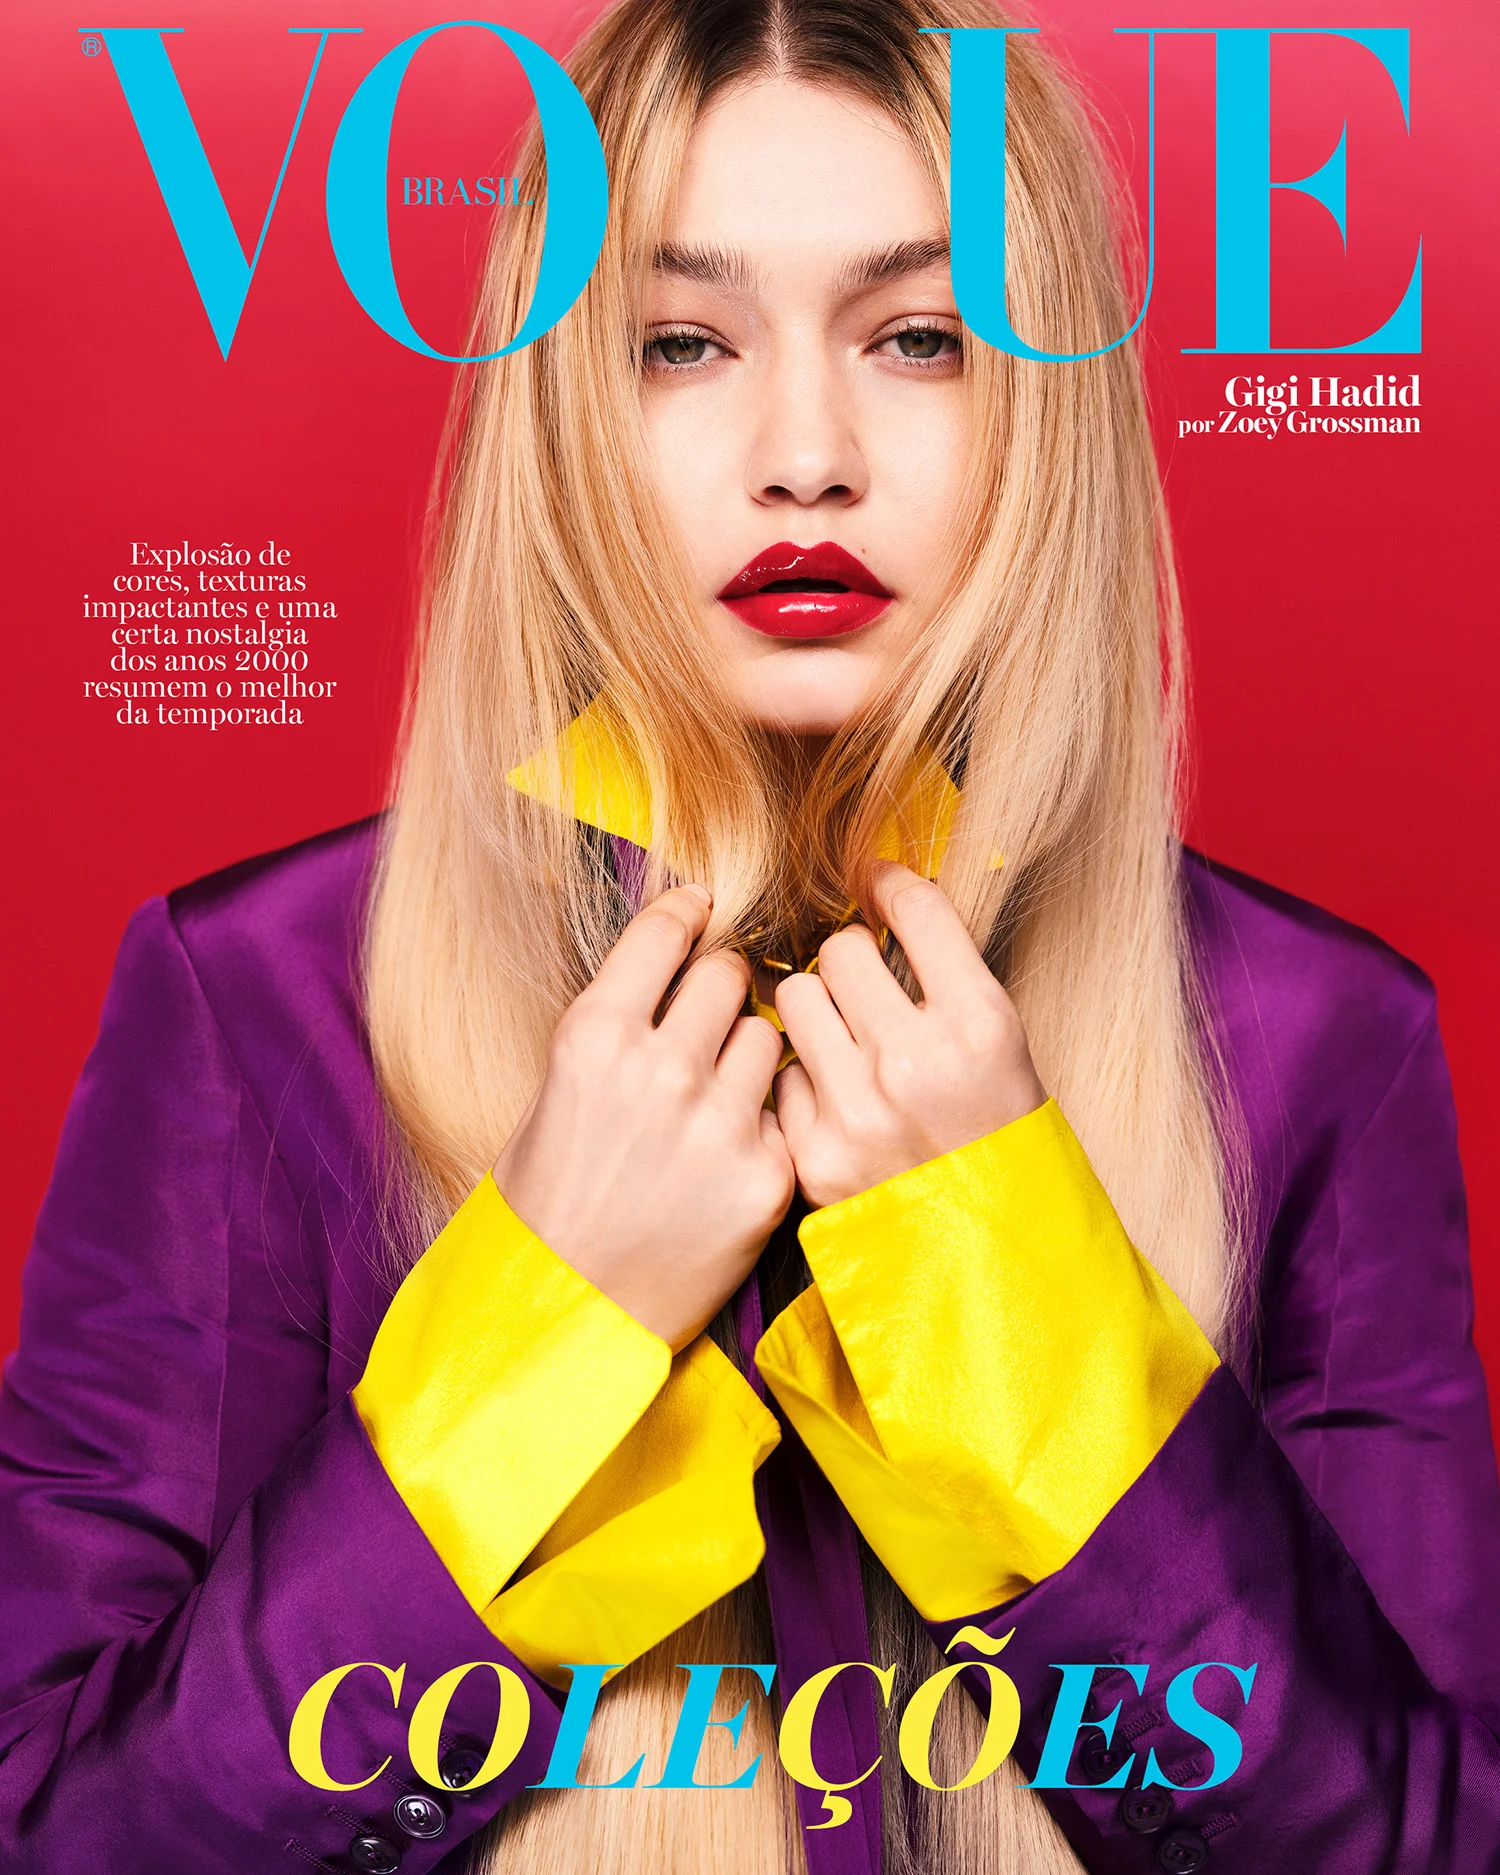 Gigi Hadid covers Vogue Brazil March 2022 by Zoey Grossman